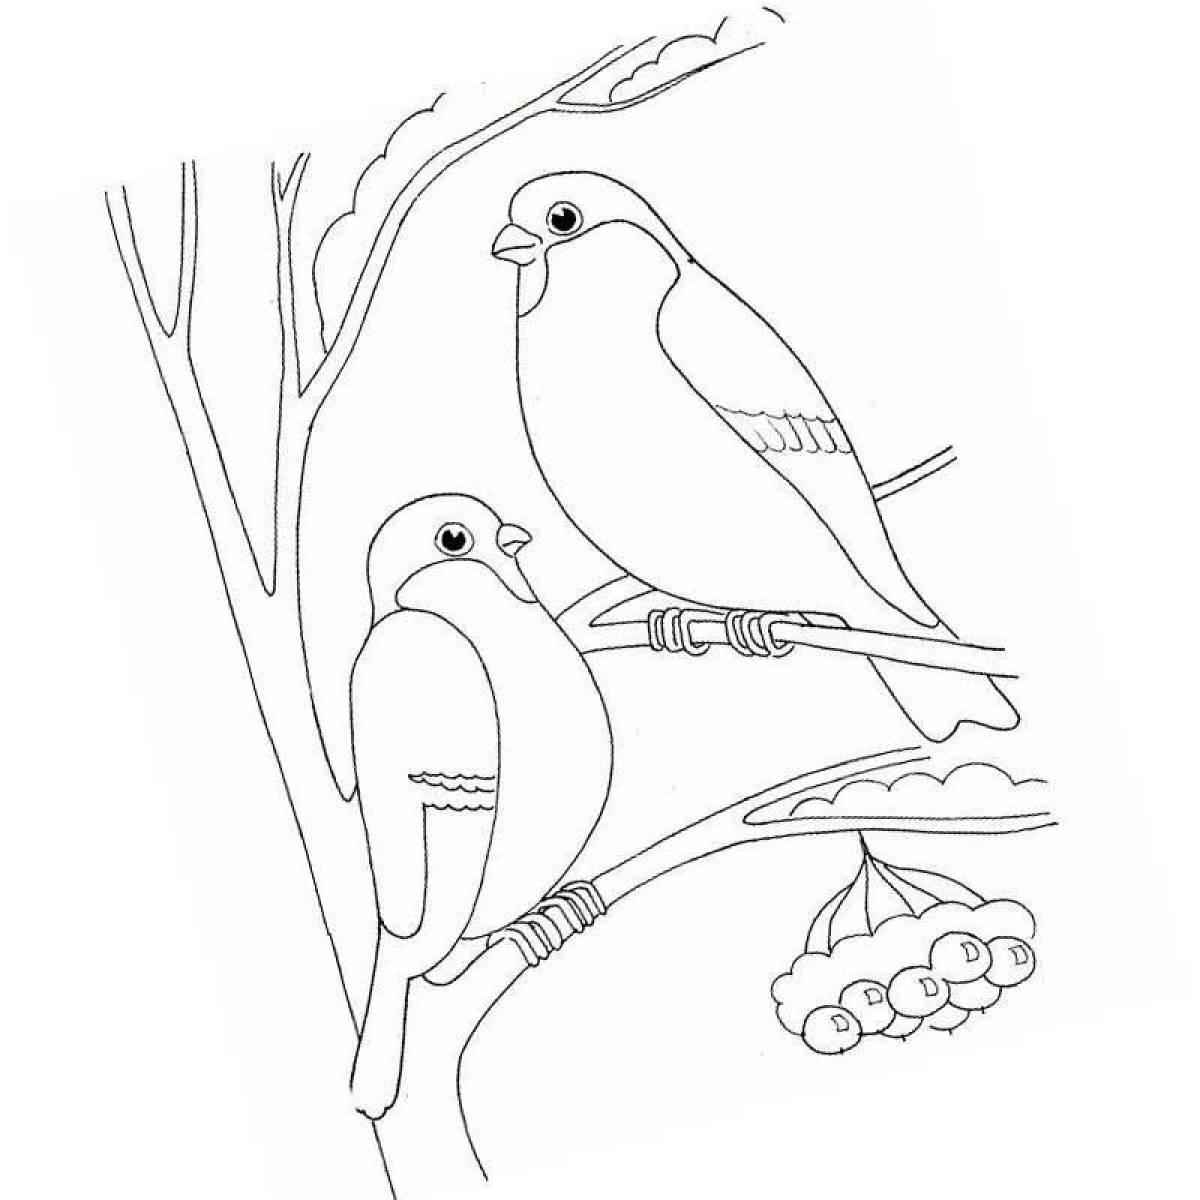 Shiny wintering birds coloring pages for kids